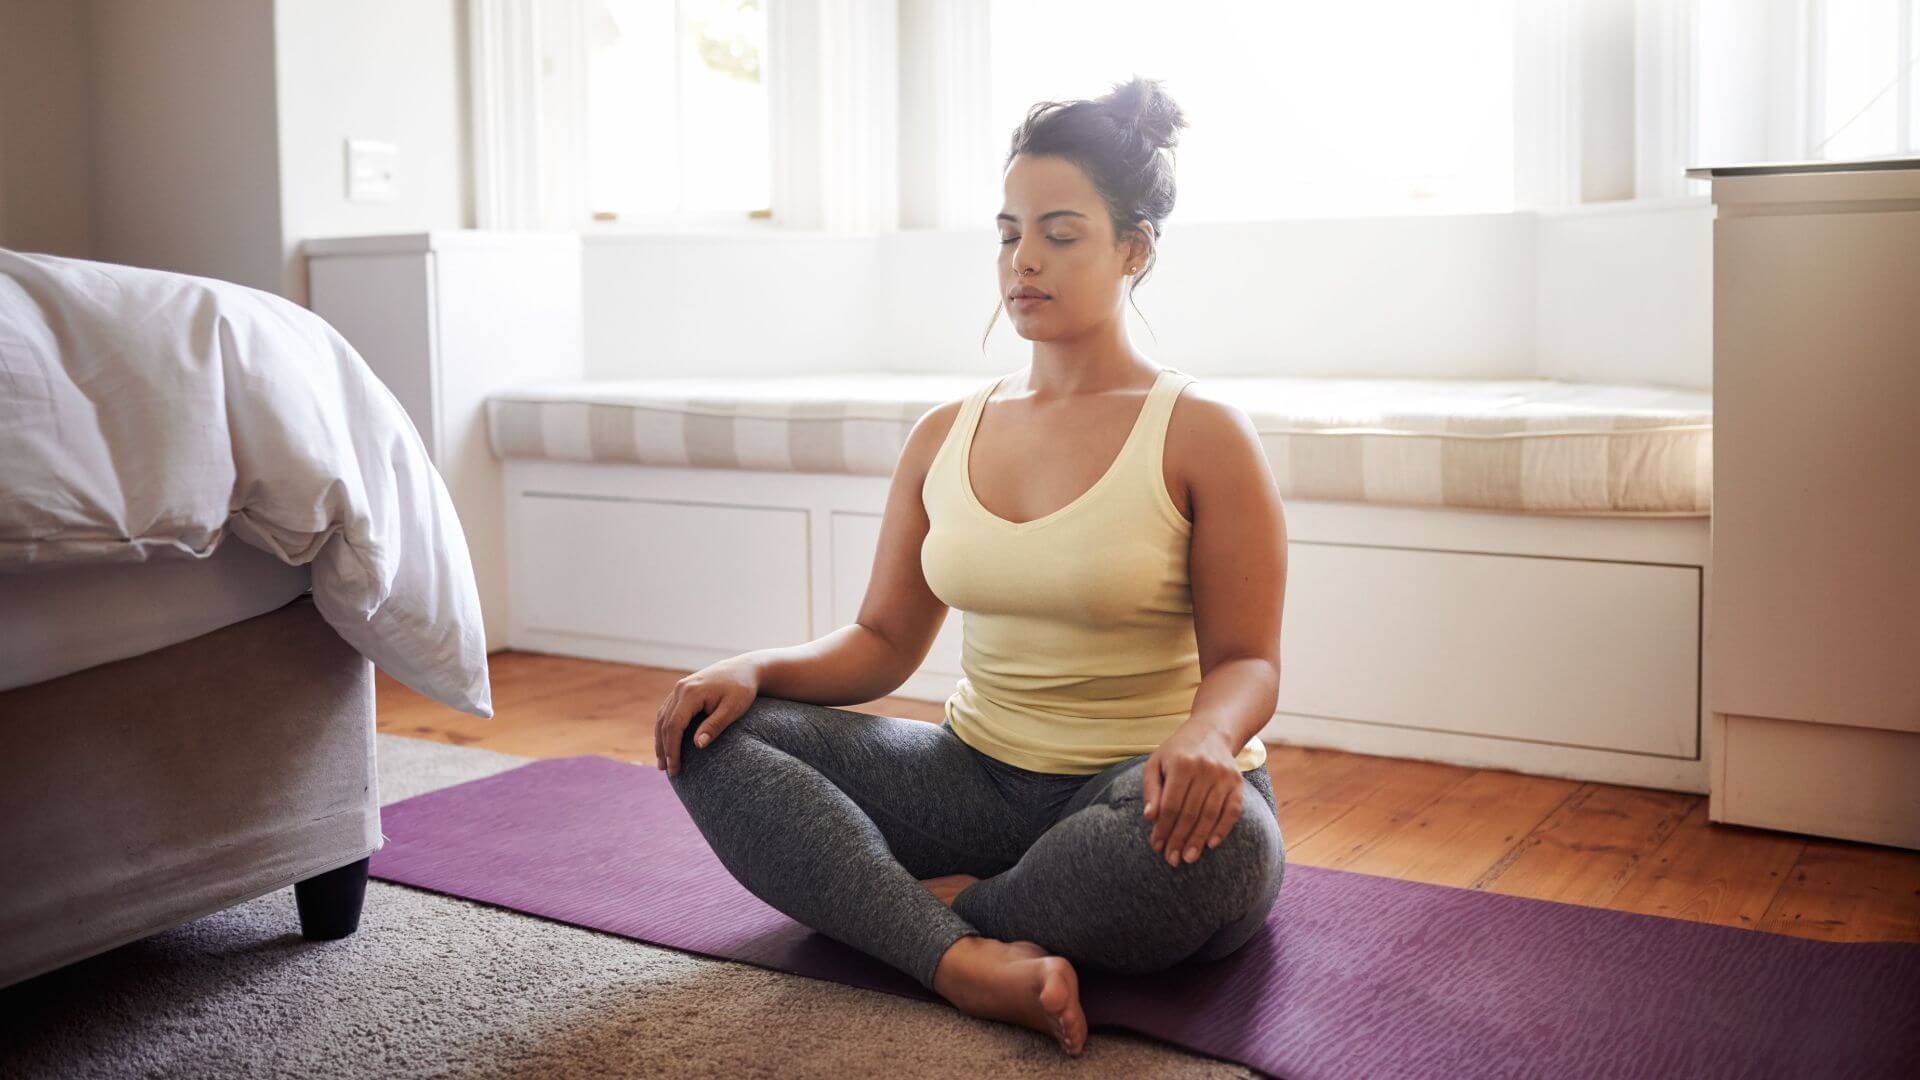 Discover the benefits of meditation for stress reduction and personal growth. Learn how to incorporate this ancient practice into your daily routine for improved well-being and increased happiness.